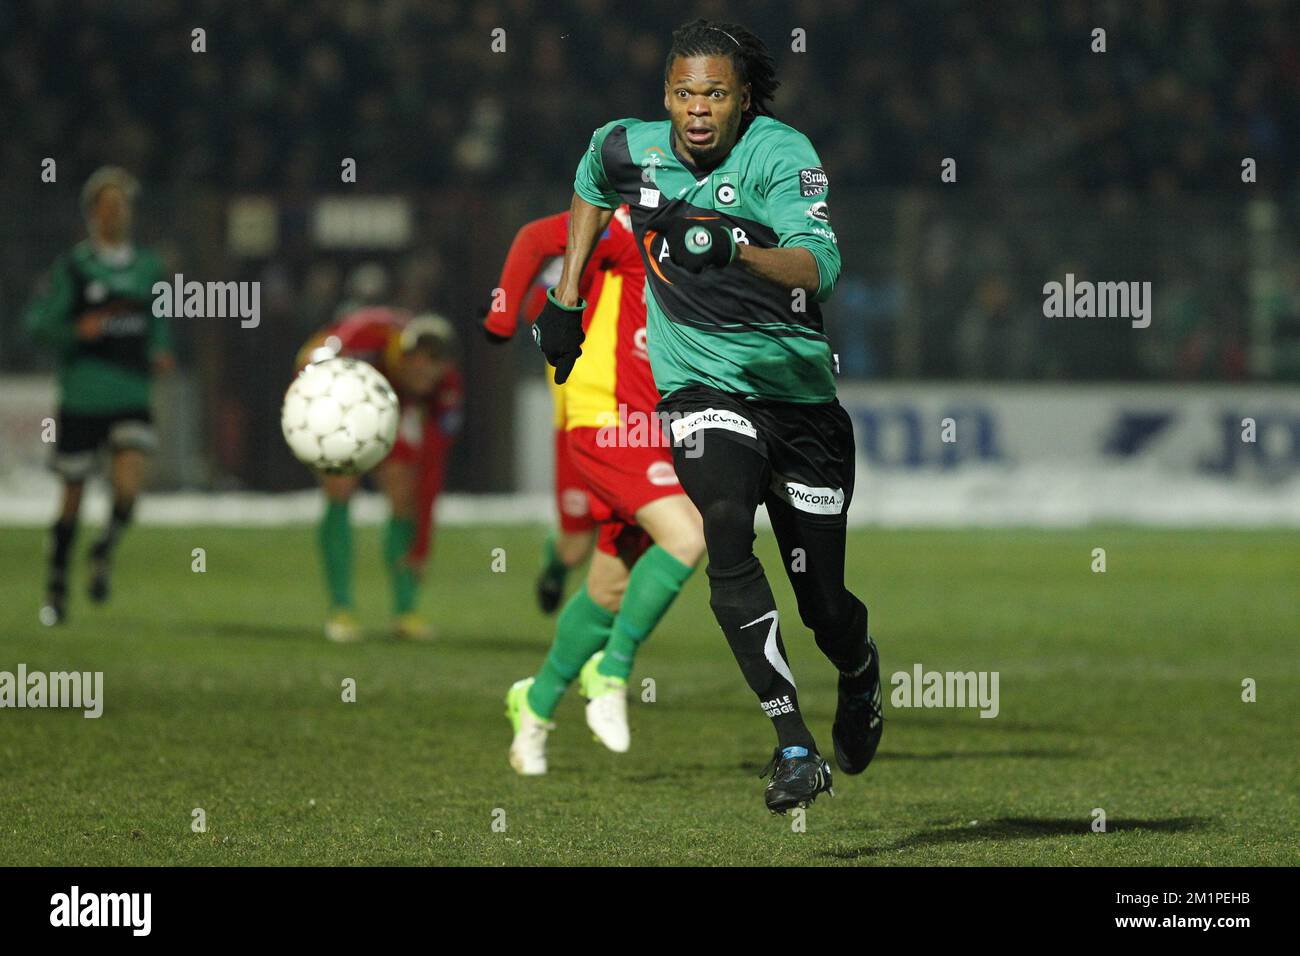 20130116 - OOSTENDE, BELGIUM: Cercle's Michael Uchebo pictured during the return leg of the Cofidis Cup 1/4 final between Oostende KV and Cercle Brugge, Wednesday 16 January 2013 in Oostende. BELGA PHOTO KRISTOF VAN ACCOM Stock Photo